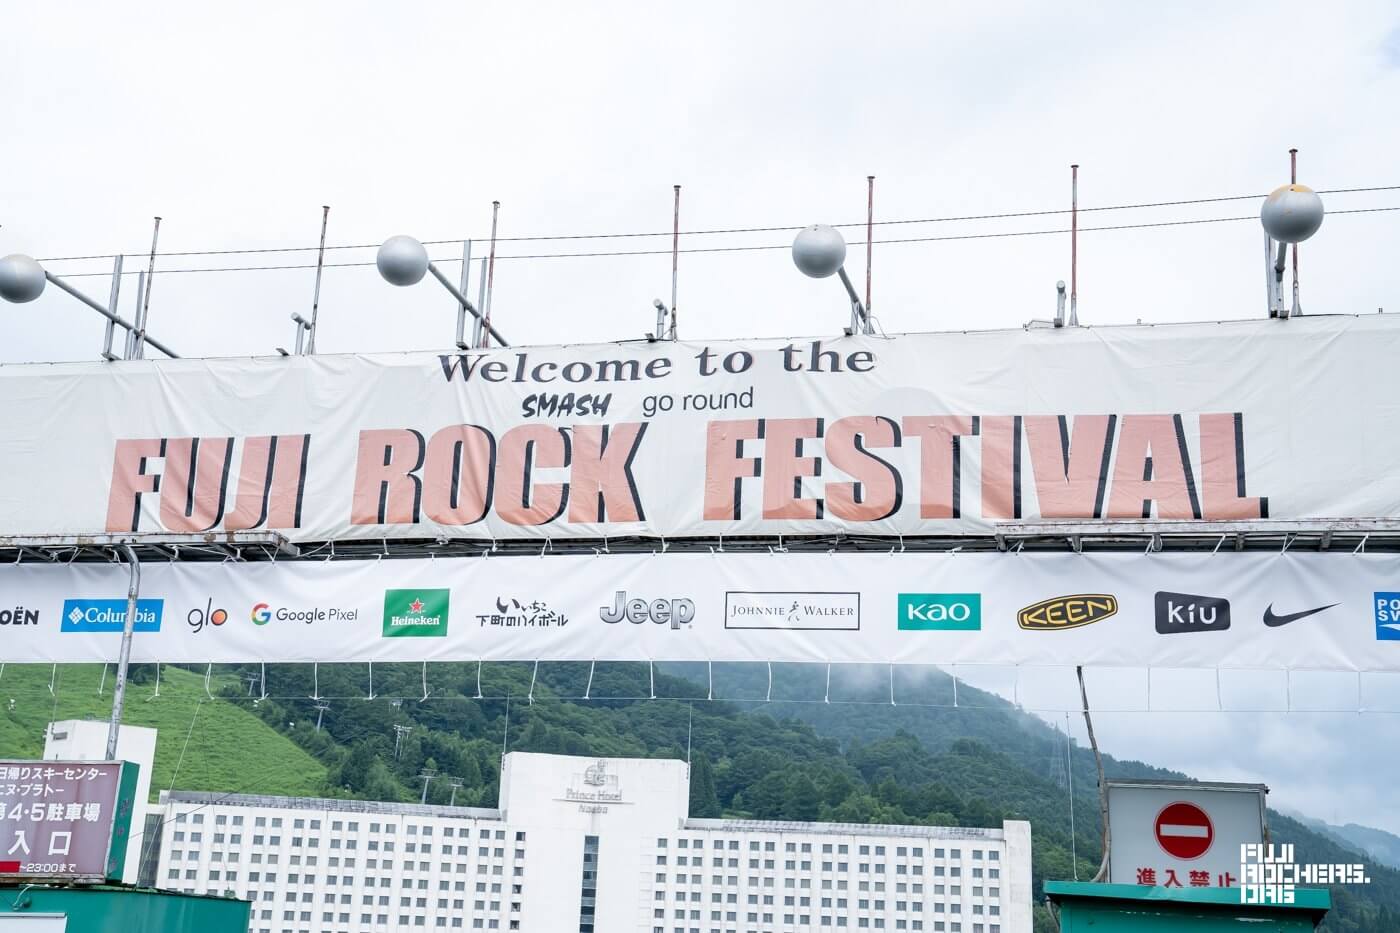 Welcome to the FUJI ROCK FESTIVAL